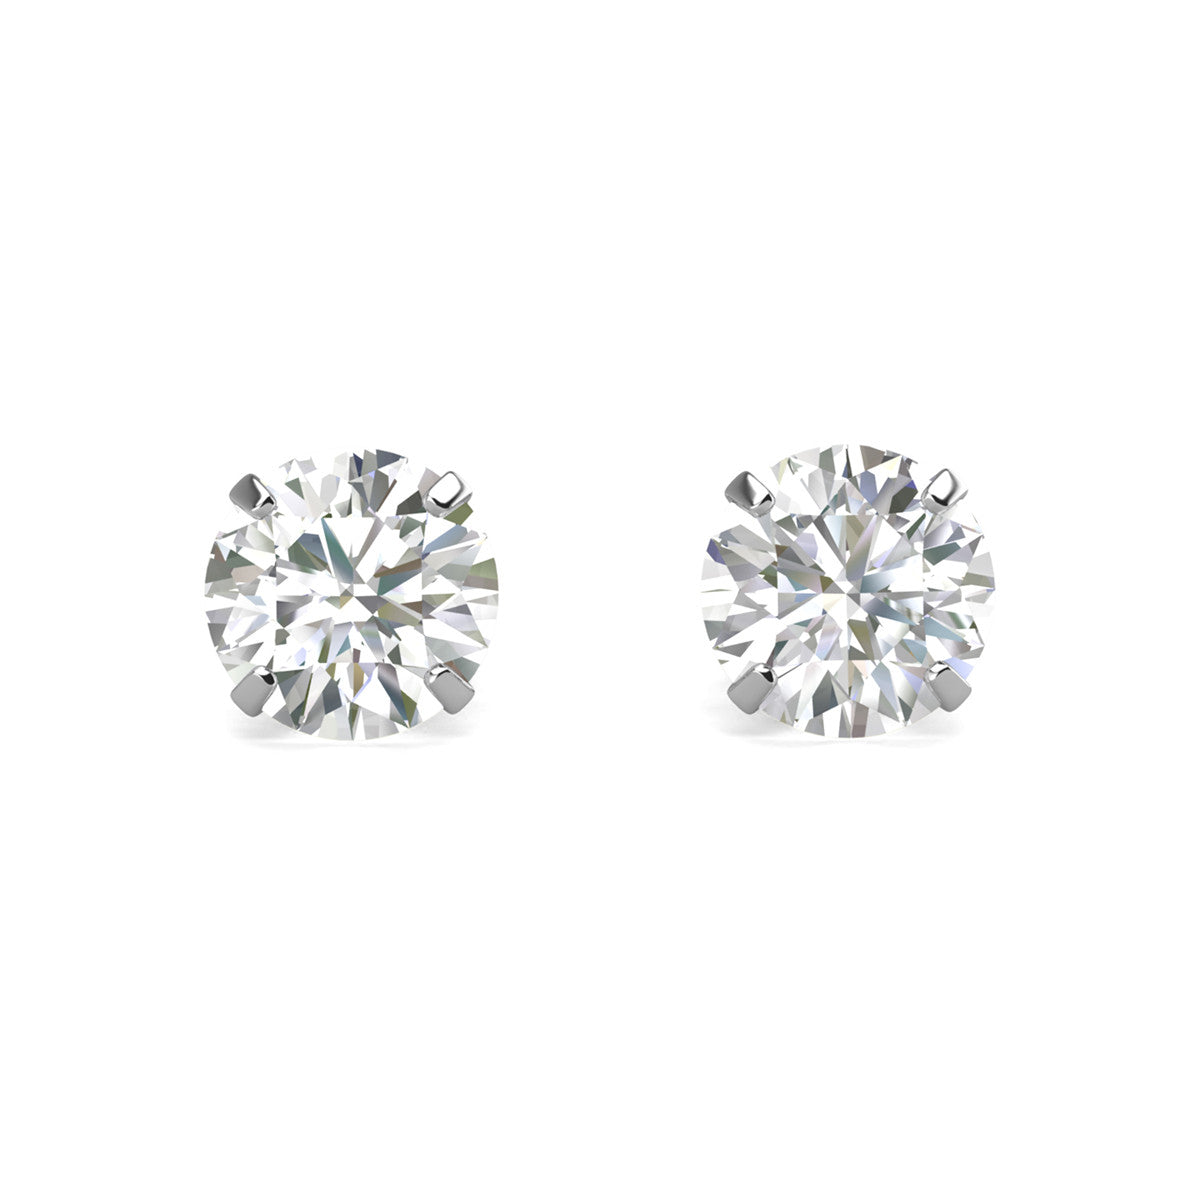 Moissanite by Cate & Chloe Vera Sterling Silver Stud Earrings with Moissanite and 5A Cubic Zirconia Crystals